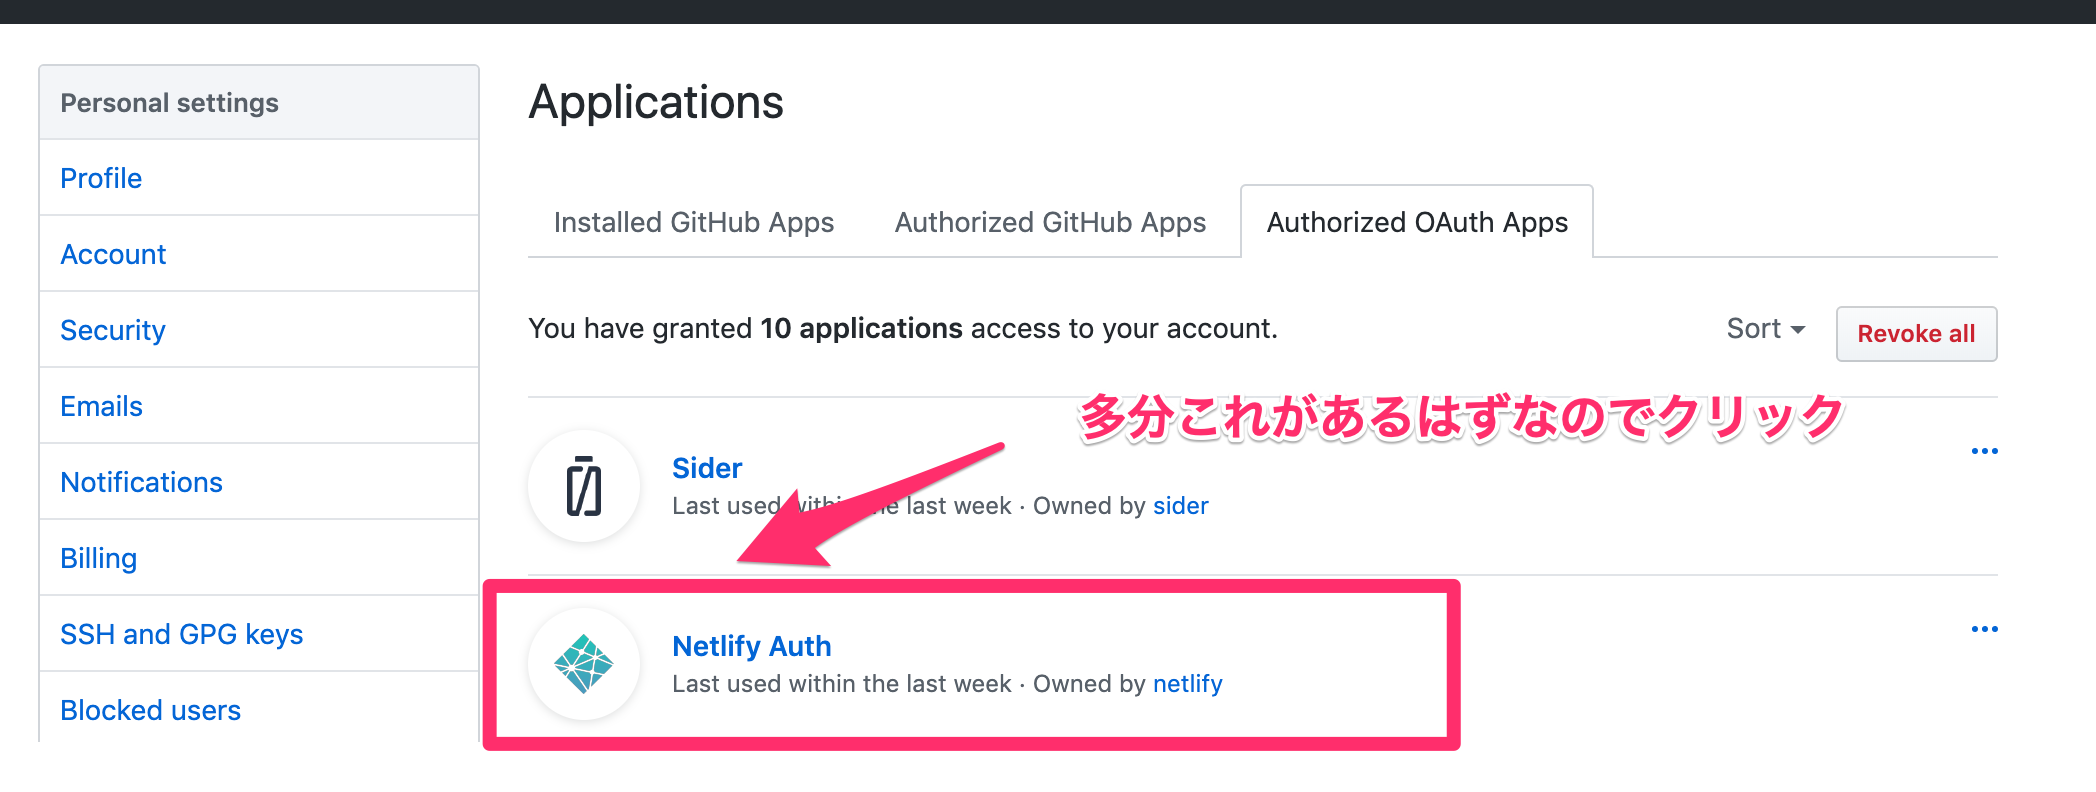 Authorized_OAuth_Apps.png